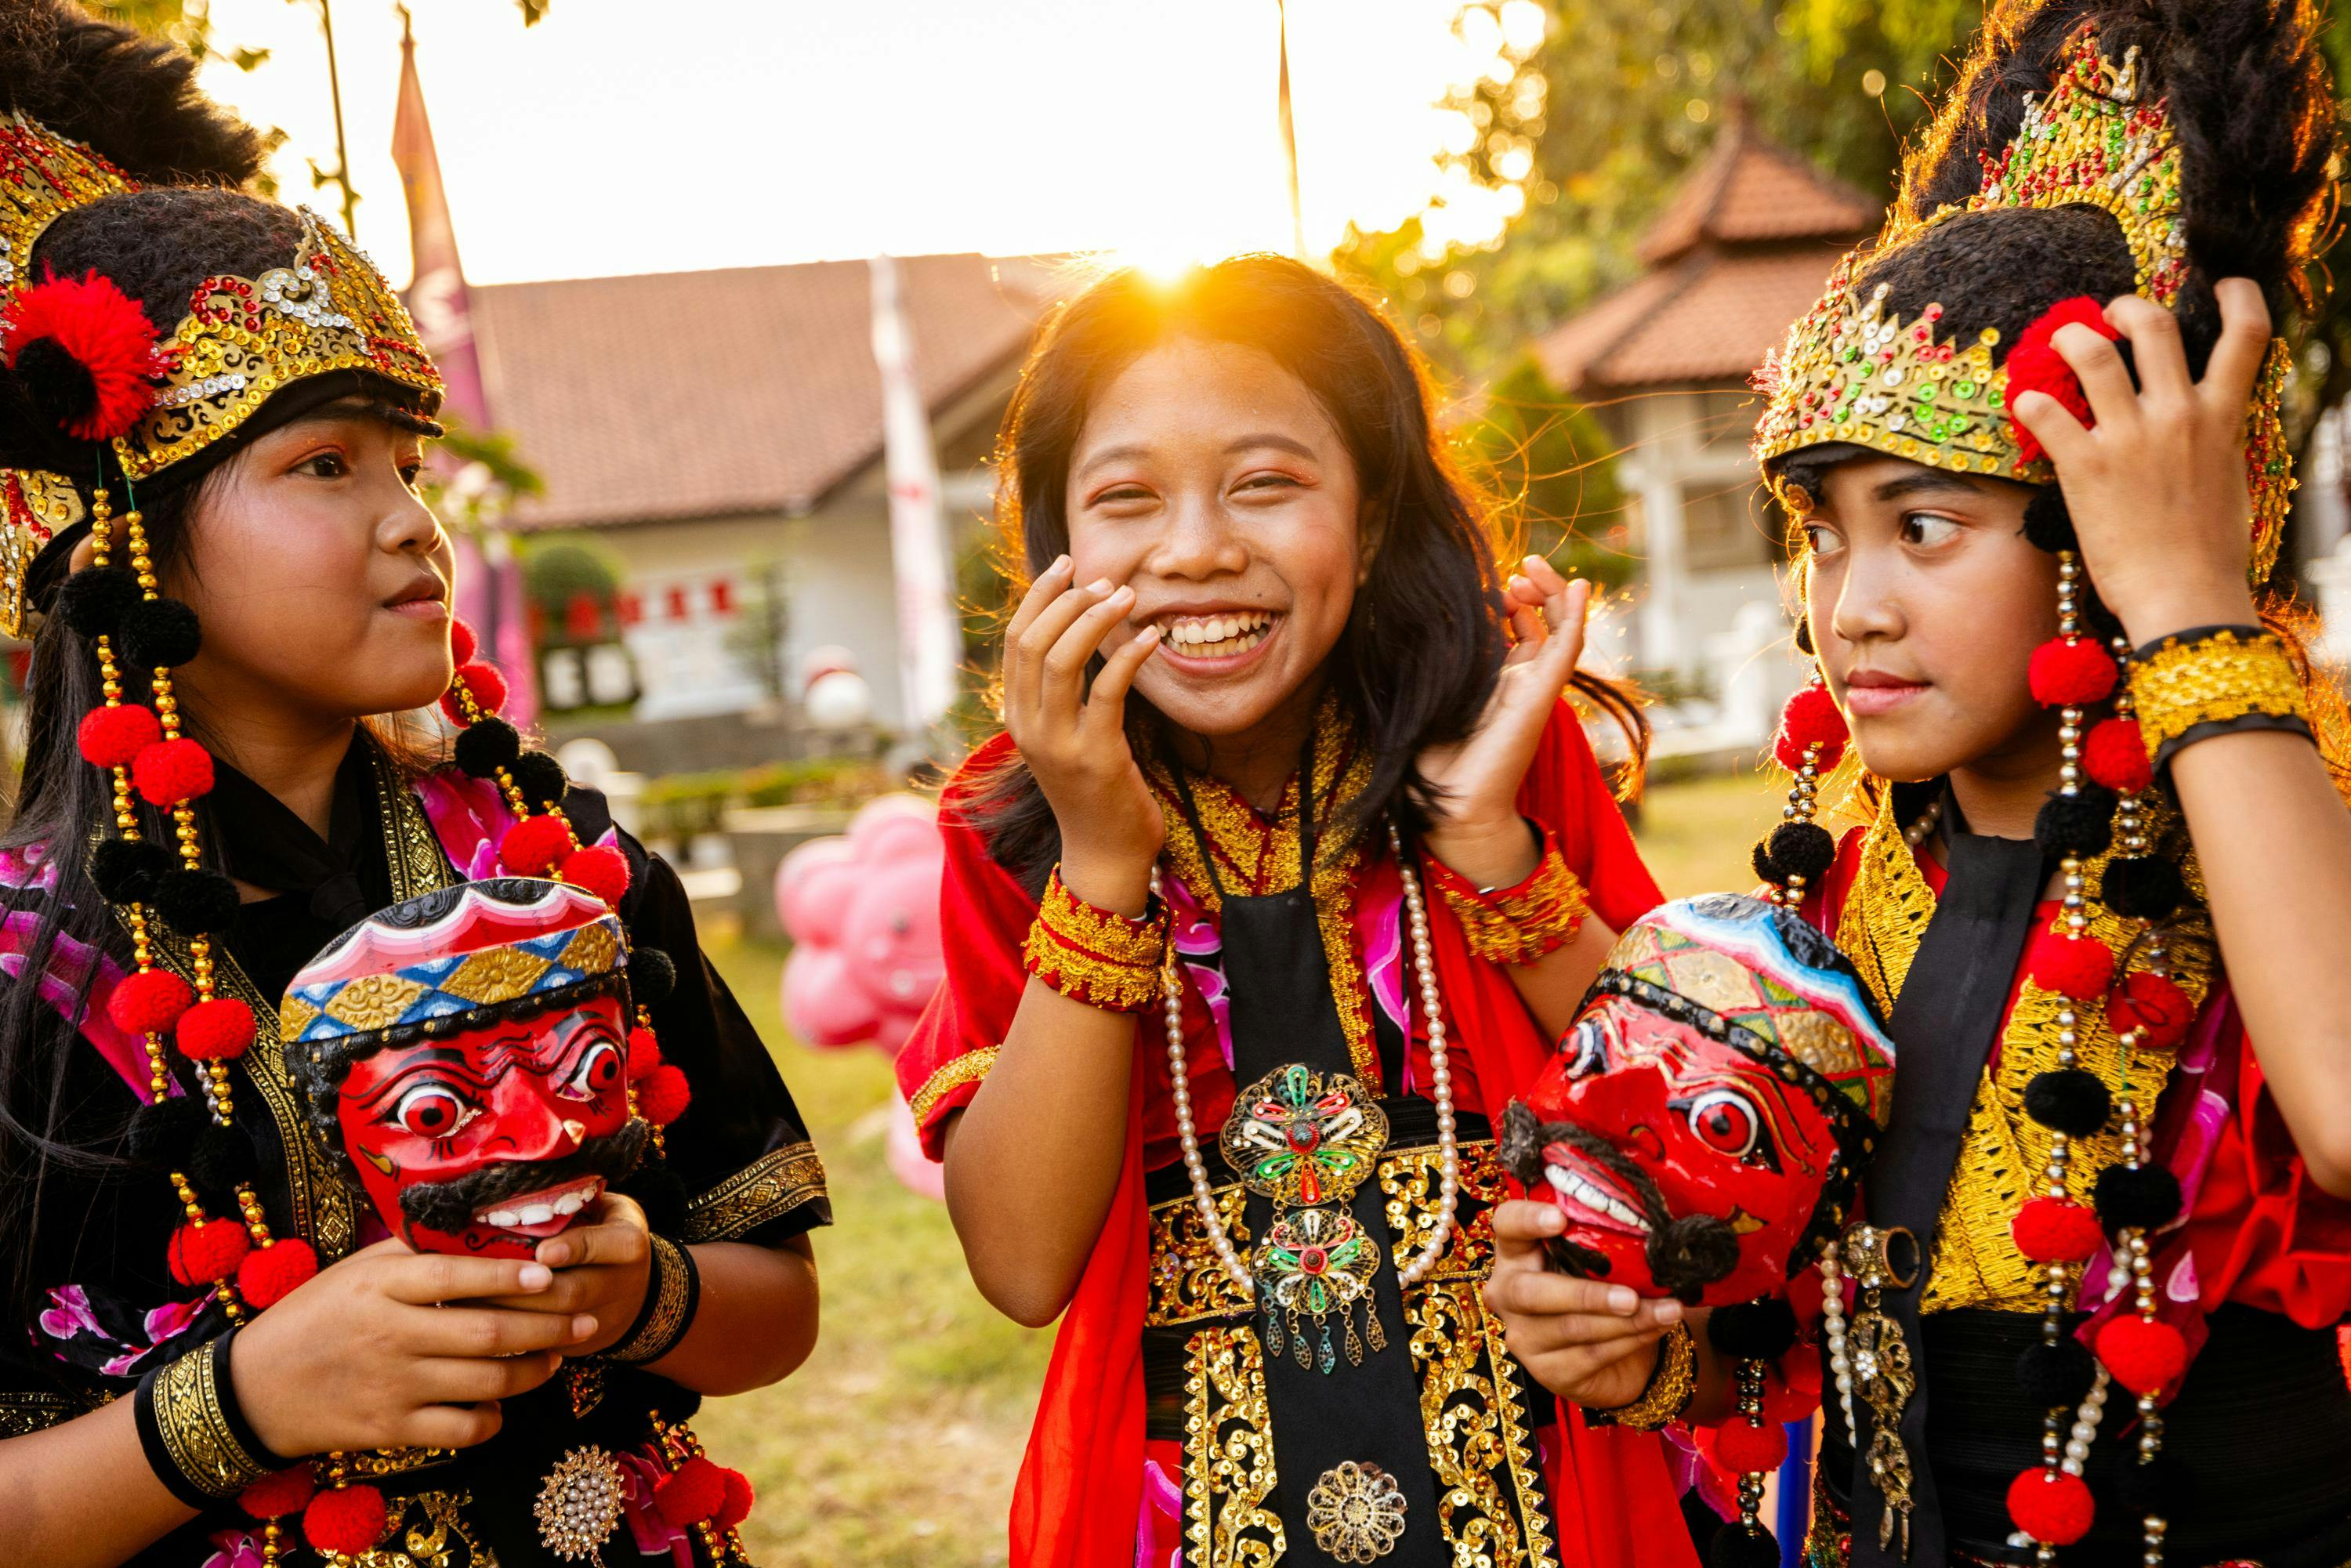 Guests experience local culture in Indonesia.